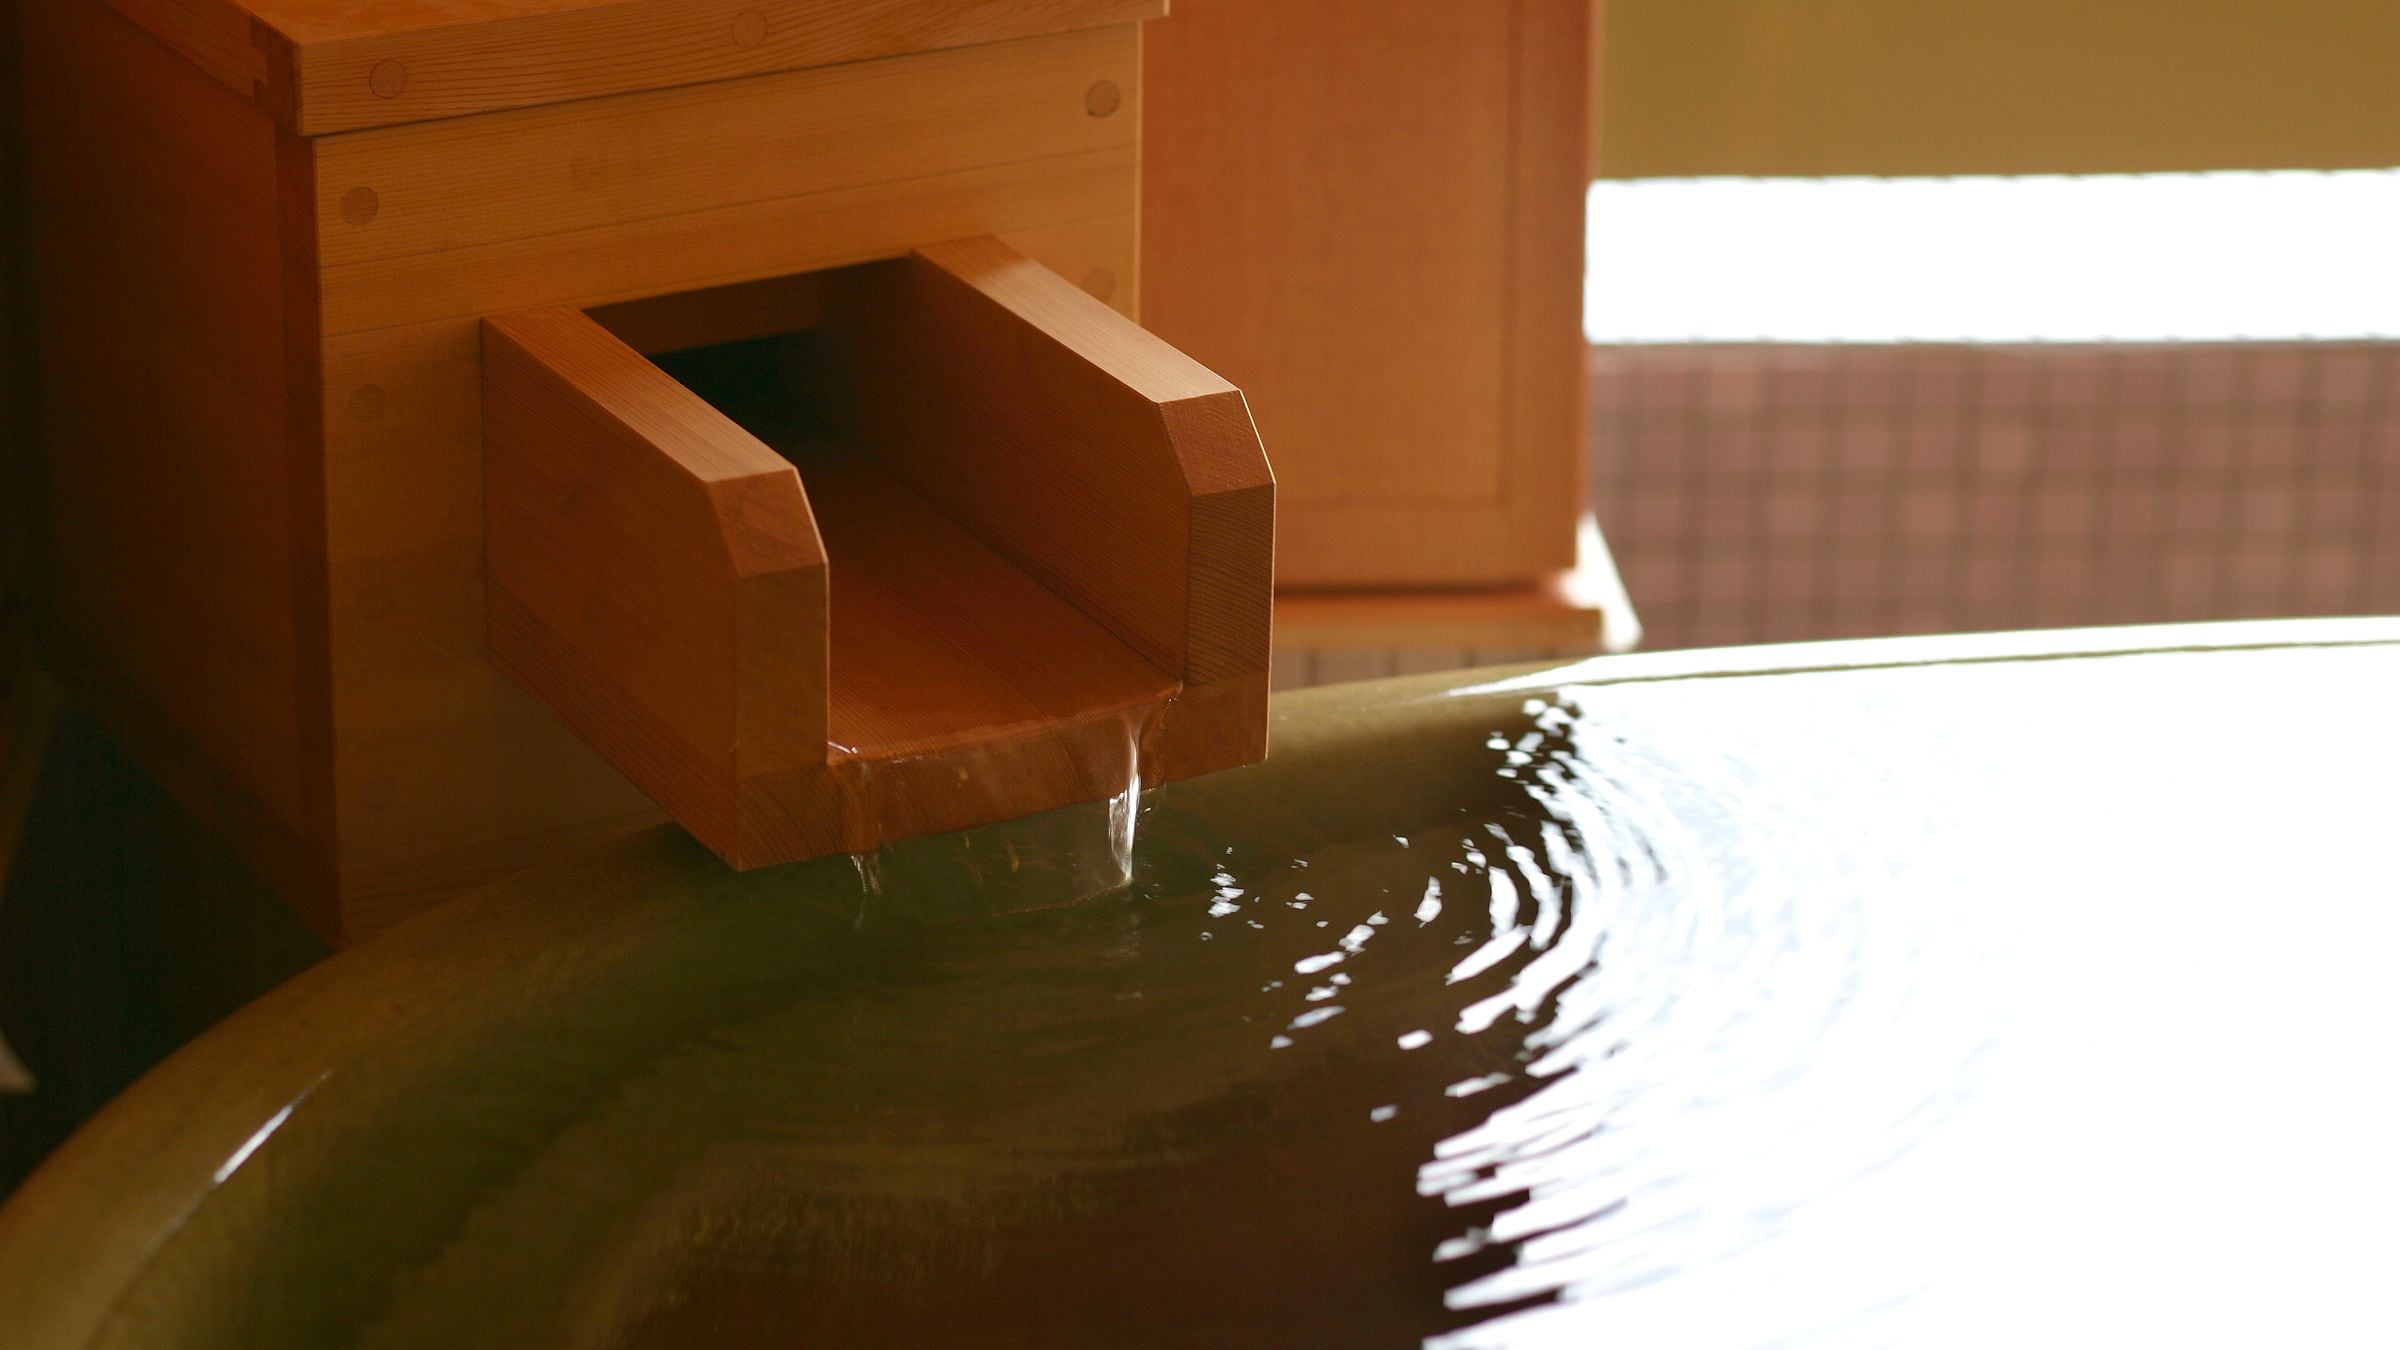 The open-air bath in the guest room is 100% free-flowing from the source (no water added or heated).